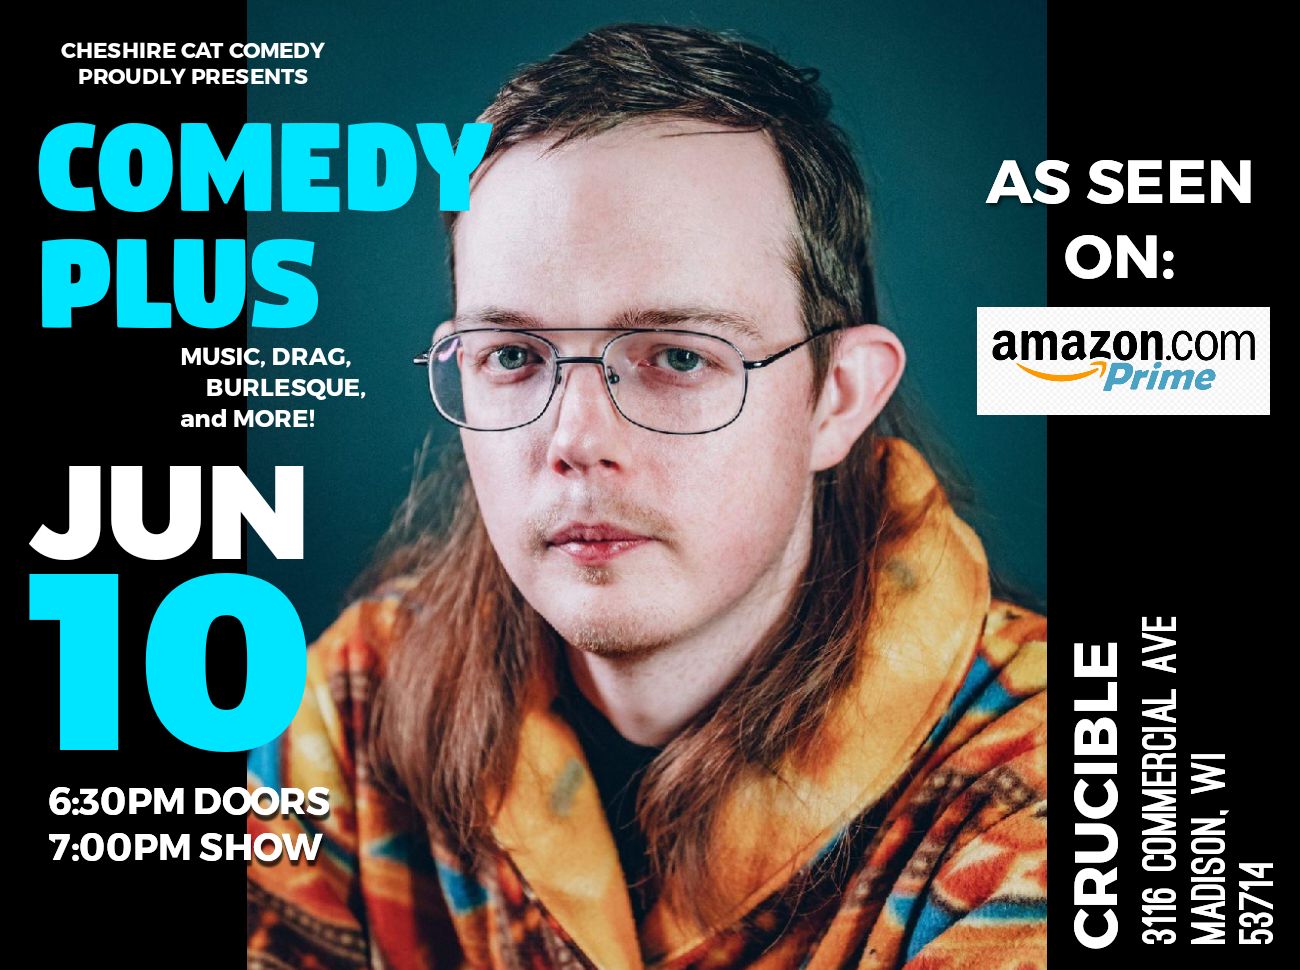 COMEDY PLUS: An evening of stand-up comedy, burlesque, and more with MIKE LESTER, Madison, Wisconsin, United States